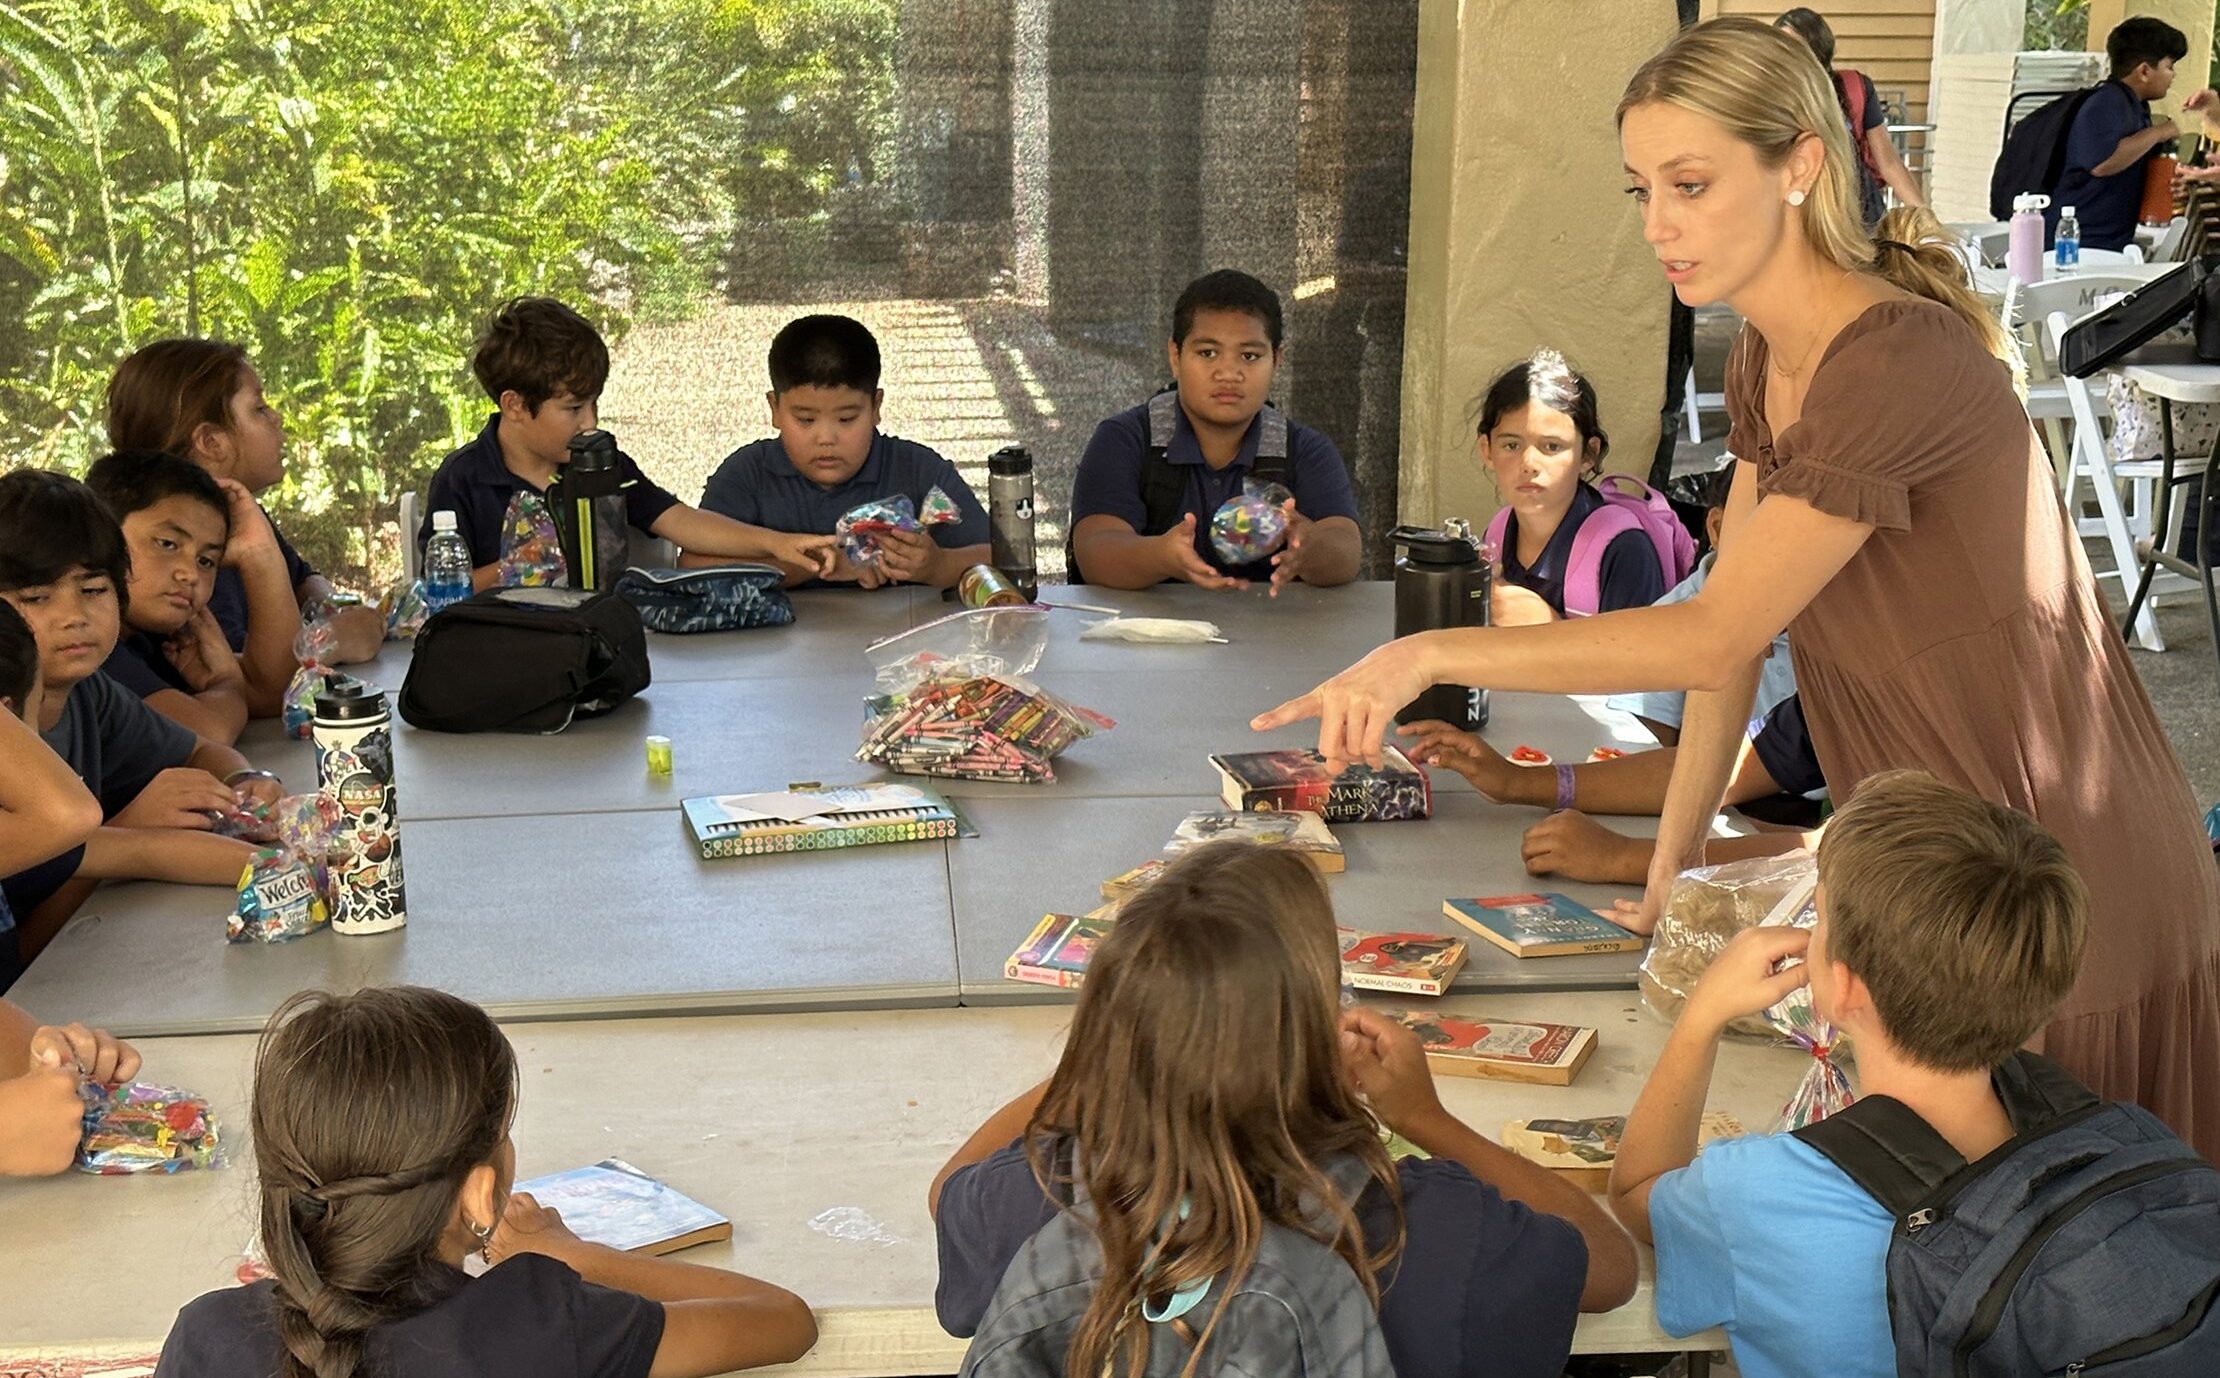 Cara Camanse, a fourth-grade teacher at Sacred Hearts School in Lahaina on the Hawaiian island of Maui, is pictured in an undated photo leading students at Sacred Hearts Mission Church in nearby Kapalua. The school has been temporarily located to the church since the wildfires of Aug. 8-9, 2023, driven by high winds, destroyed most of the school building in the historic town of Lahaina, along with more than 2,200 other buildings there. (OSV News photo/courtesy Brian Perry)